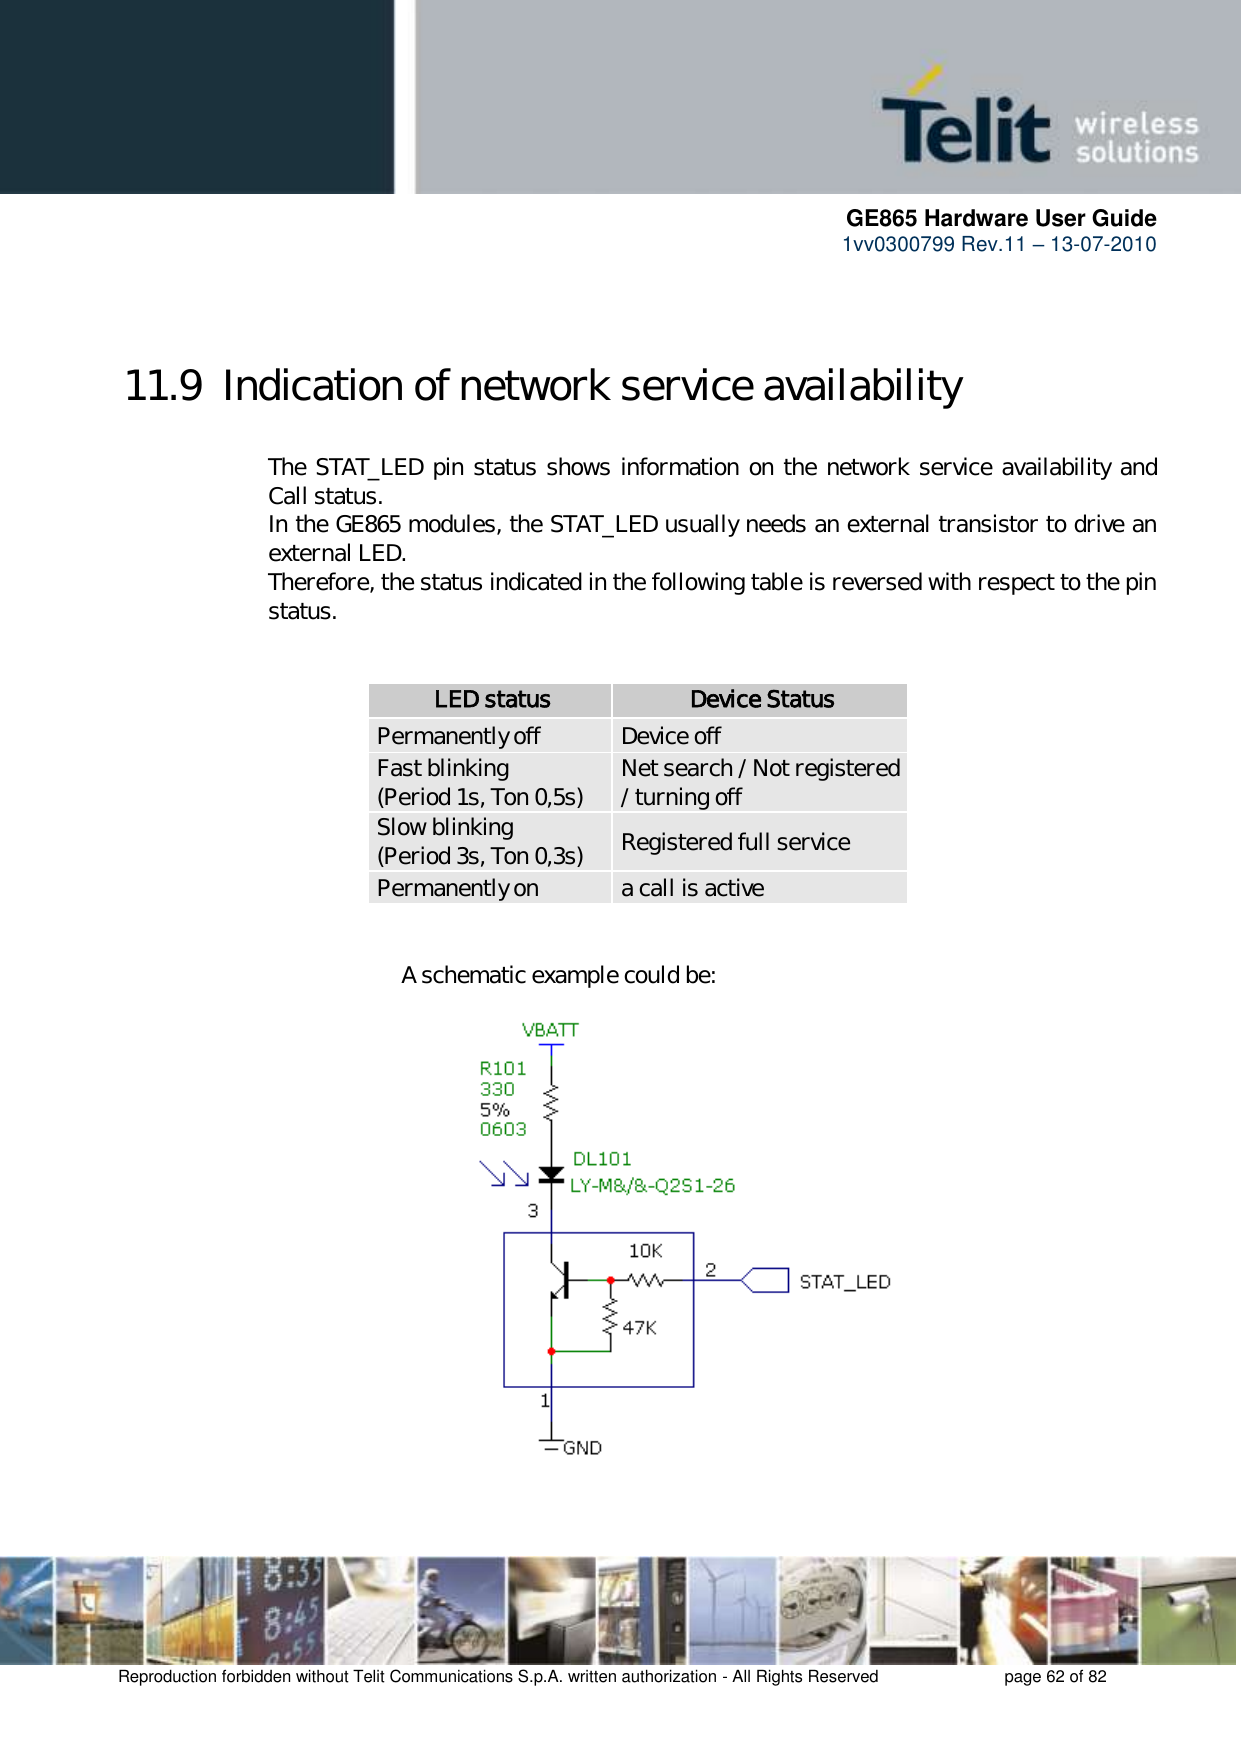      GE865 Hardware User Guide 1vv0300799 Rev.11 – 13-07-2010       Reproduction forbidden without Telit Communications S.p.A. written authorization - All Rights Reserved    page 62 of 82   11.9  Indication of network service availability  The STAT_LED pin status shows information on the network service availability and Call status.  In the GE865 modules, the STAT_LED usually needs an external transistor to drive an external LED. Therefore, the status indicated in the following table is reversed with respect to the pin status.              LED status Device Status Permanently off Device off Fast blinking (Period 1s, Ton 0,5s) Net search / Not registered / turning off Slow blinking (Period 3s, Ton 0,3s) Registered full service Permanently on a call is active                   A schematic example could be:                    